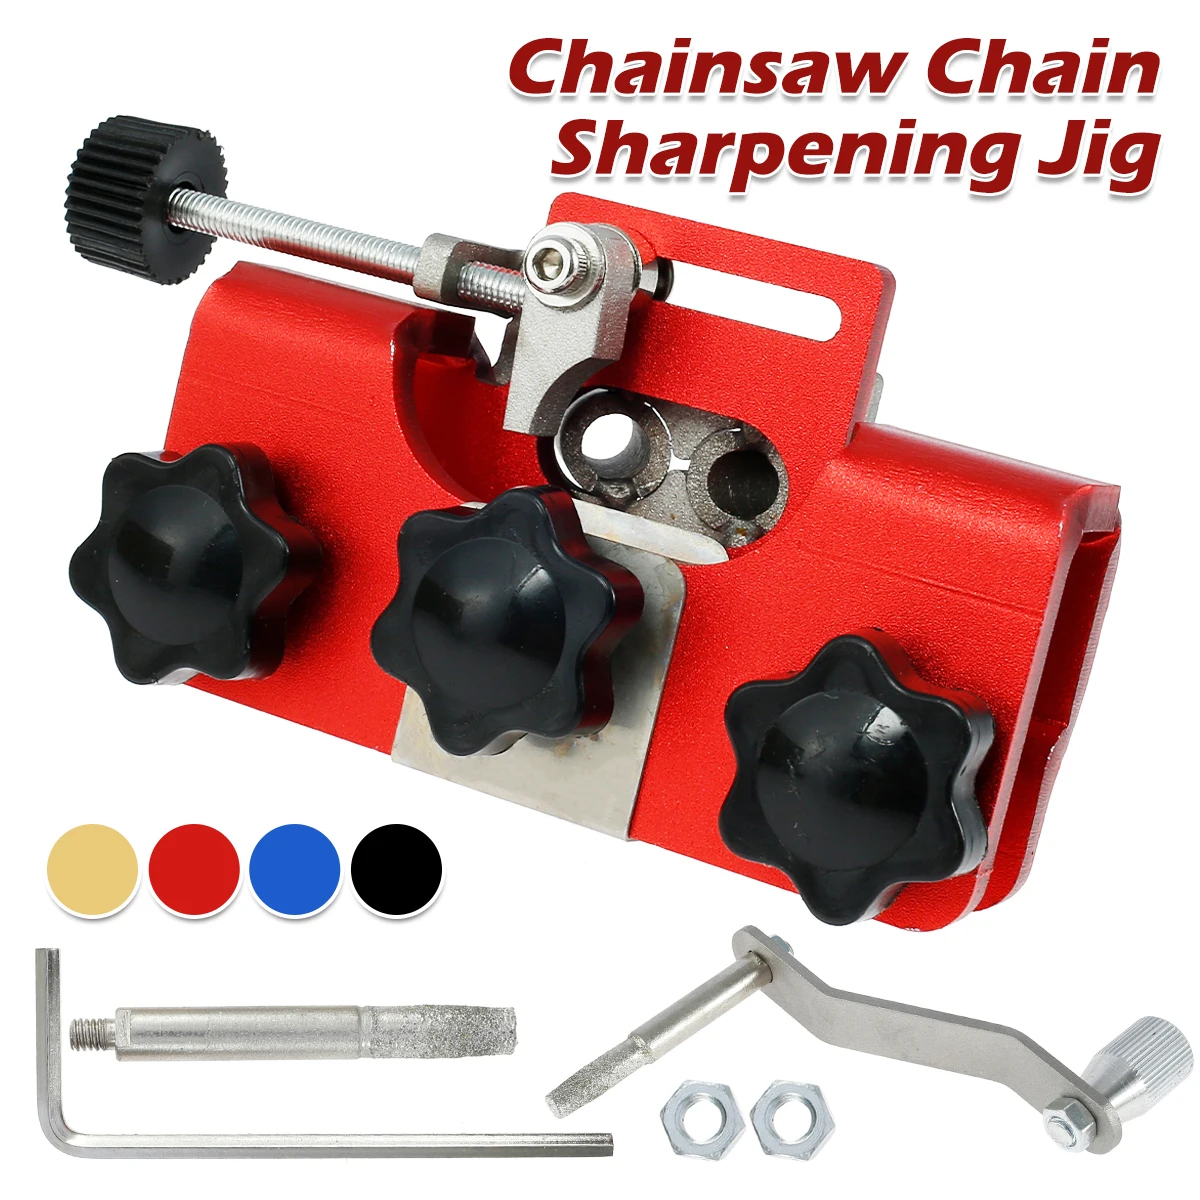 

Chainsaw Sharpener With 1 Grinder Stones Chainsaw Chain Sharpening Jig Chain Saw Sharpen Tool For Most Chain Saws Electric Saws